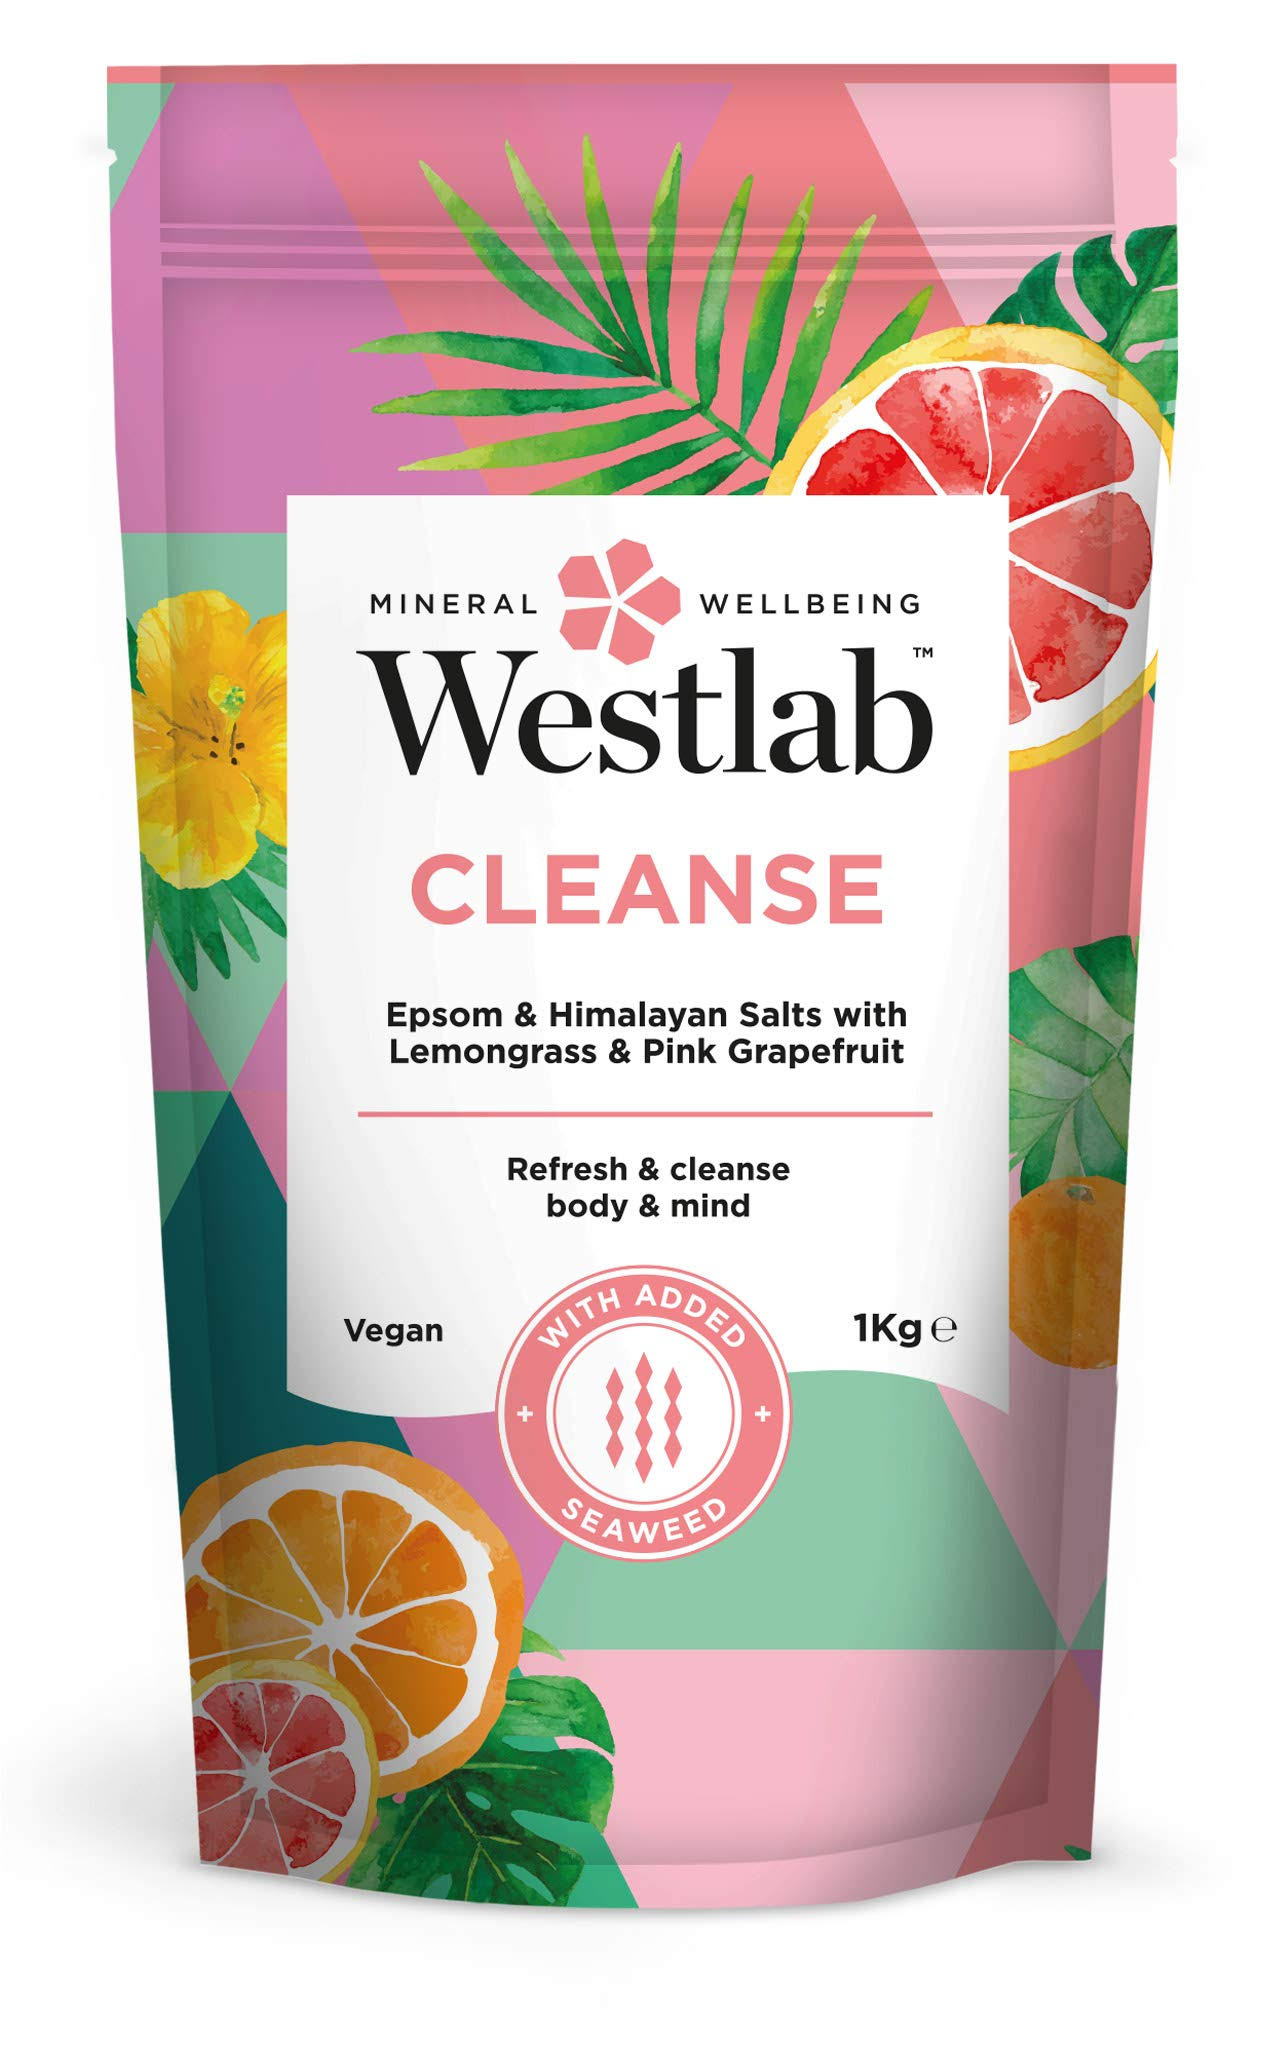 Westlab Cleanse Epsom and Himalayan Salts - with Lemongrass and Pink Grapefruit, 1kg